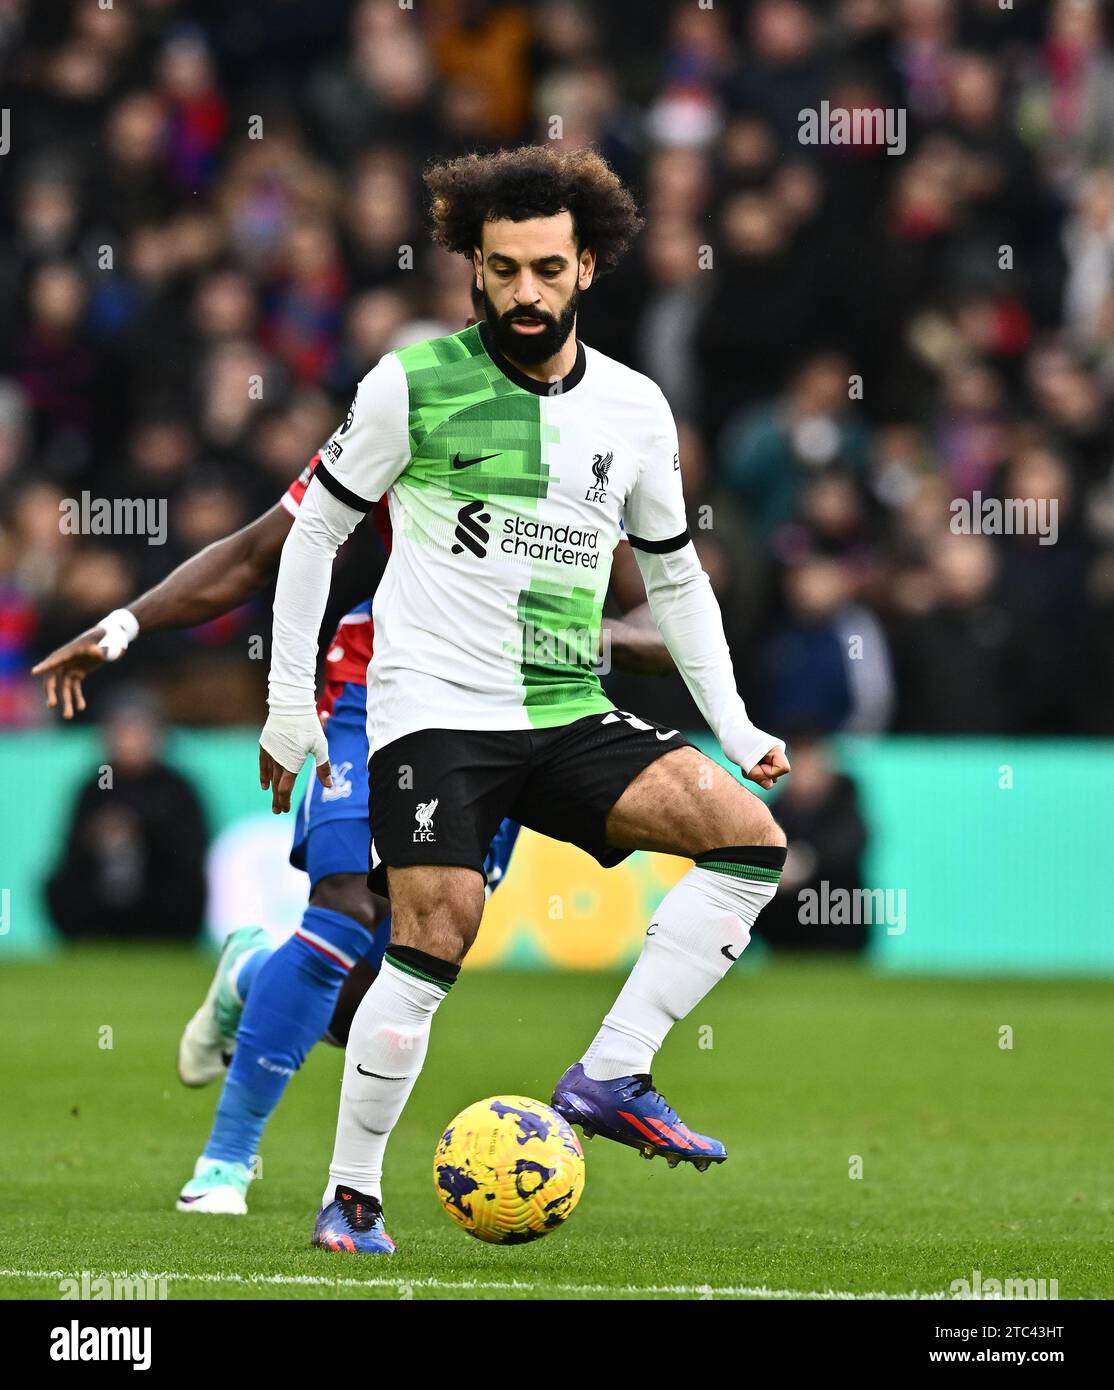 LONDON, ENGLAND - DECEMBER 9: Mohamed Salah during the Premier League match between Crystal Palace and Liverpool FC at Selhurst Park on December 9, 20 Stock Photo